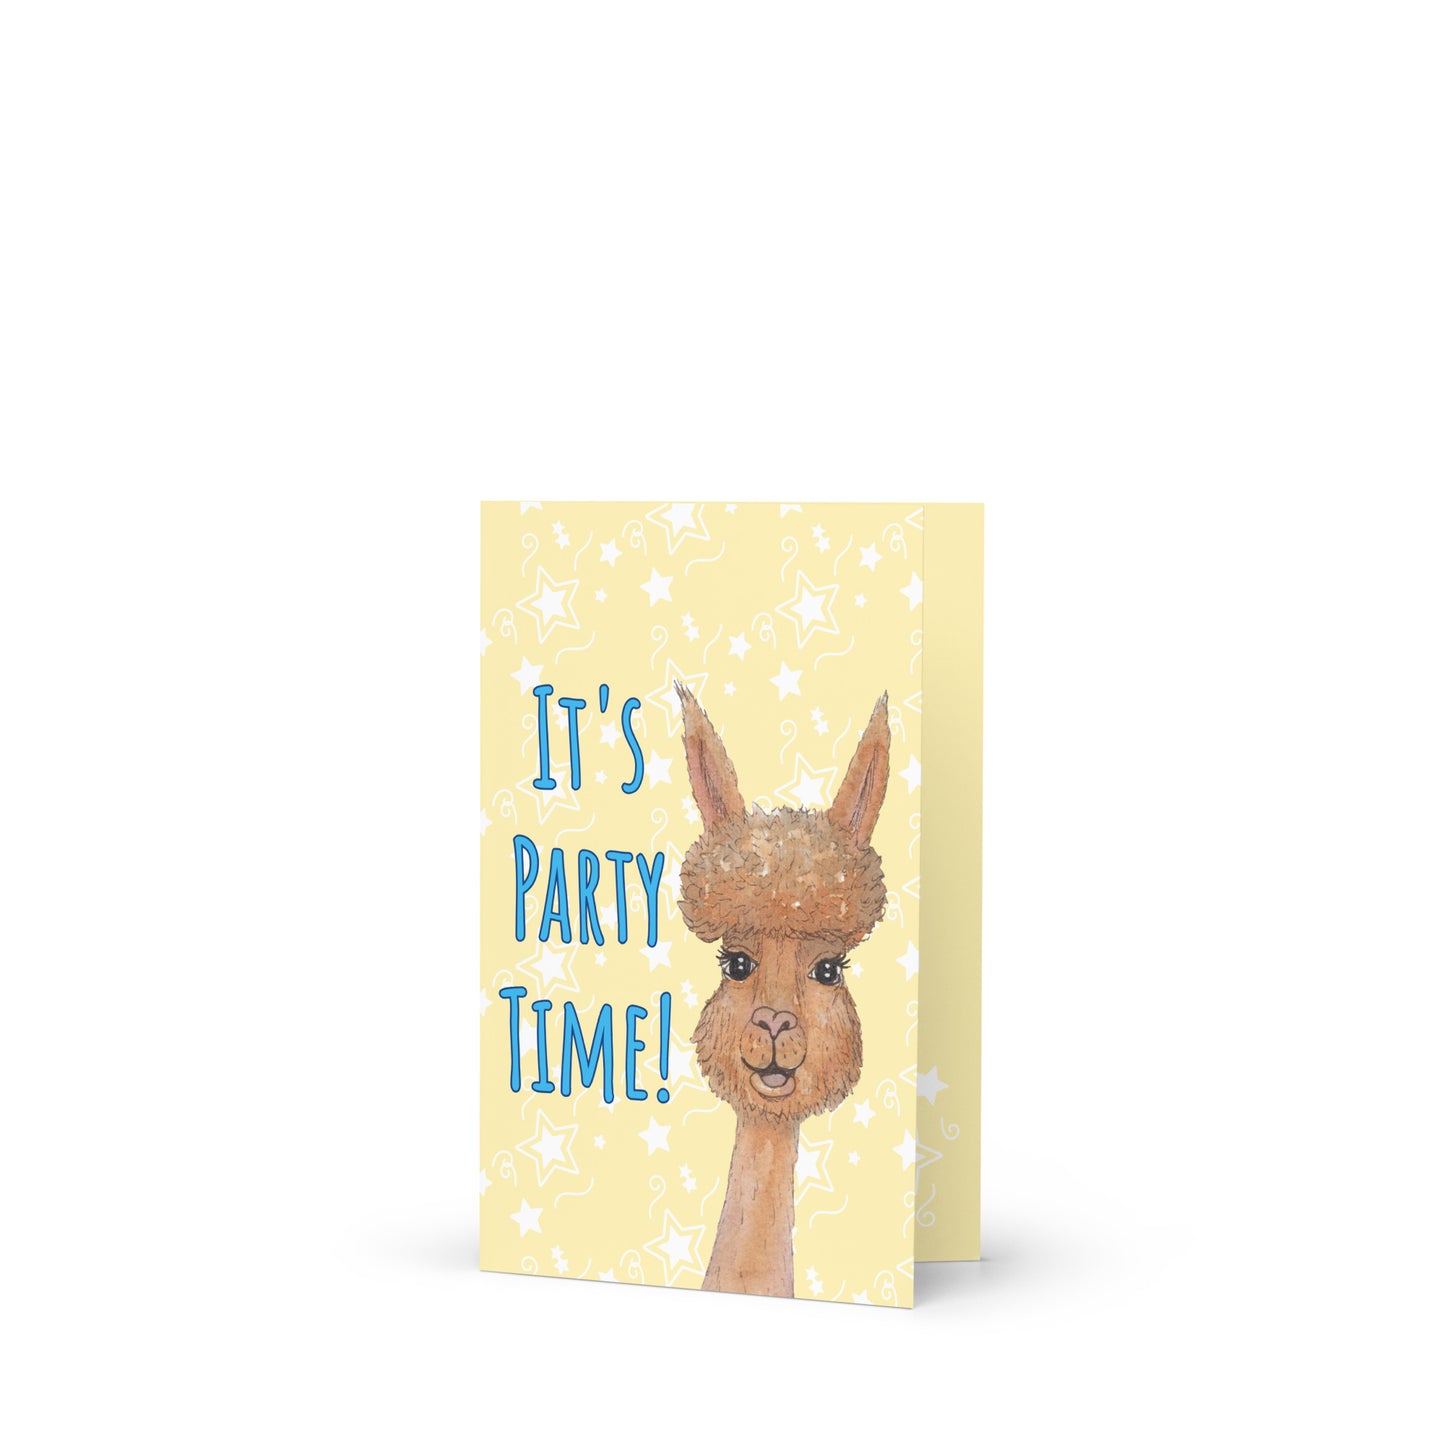 4 by 6 inch party alpaca greeting card. Image shows folded card standing up. Background of card is pastel yellow with white star accents. Front has watercolor alpaca and text: It's party time!